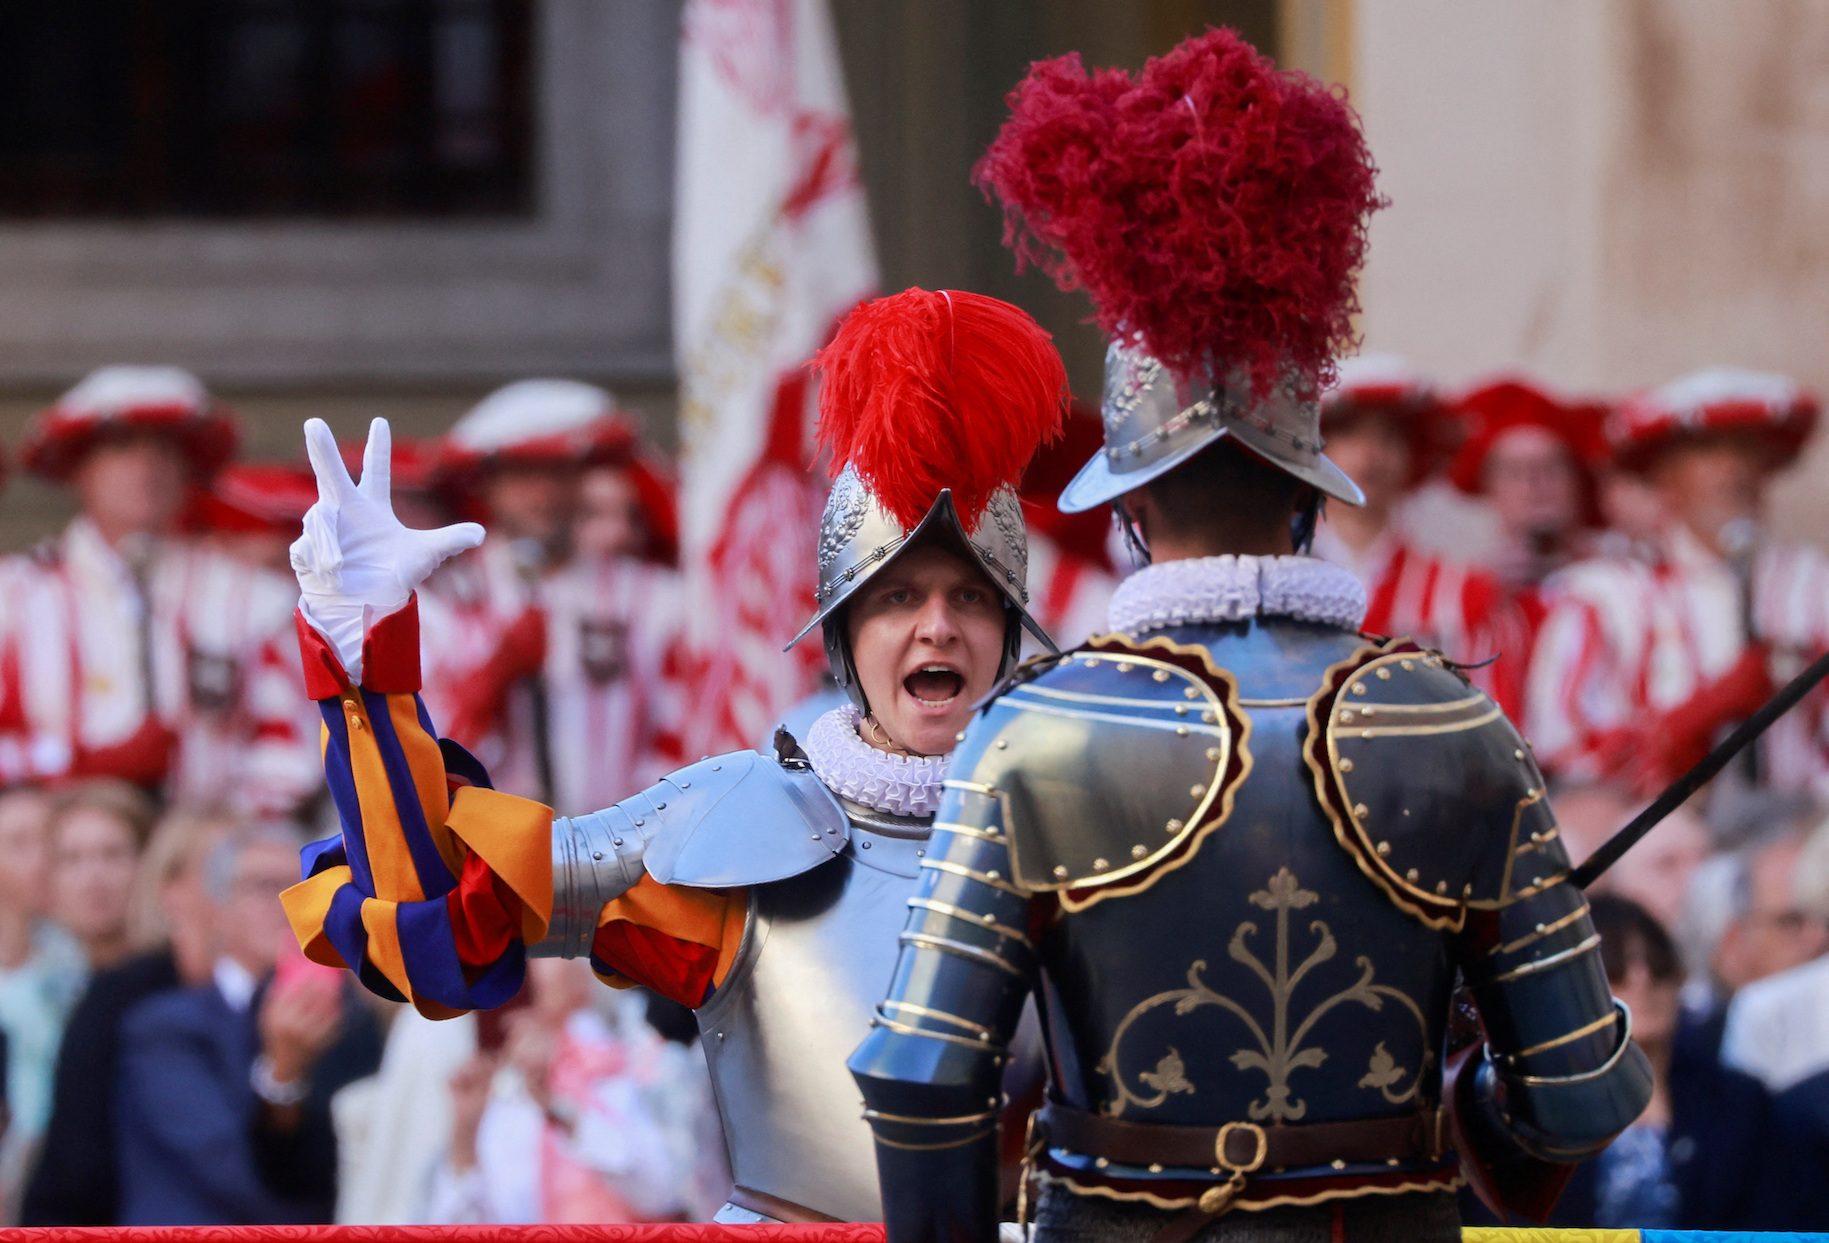 New members of elite Swiss Guard sworn in to protect the Pope